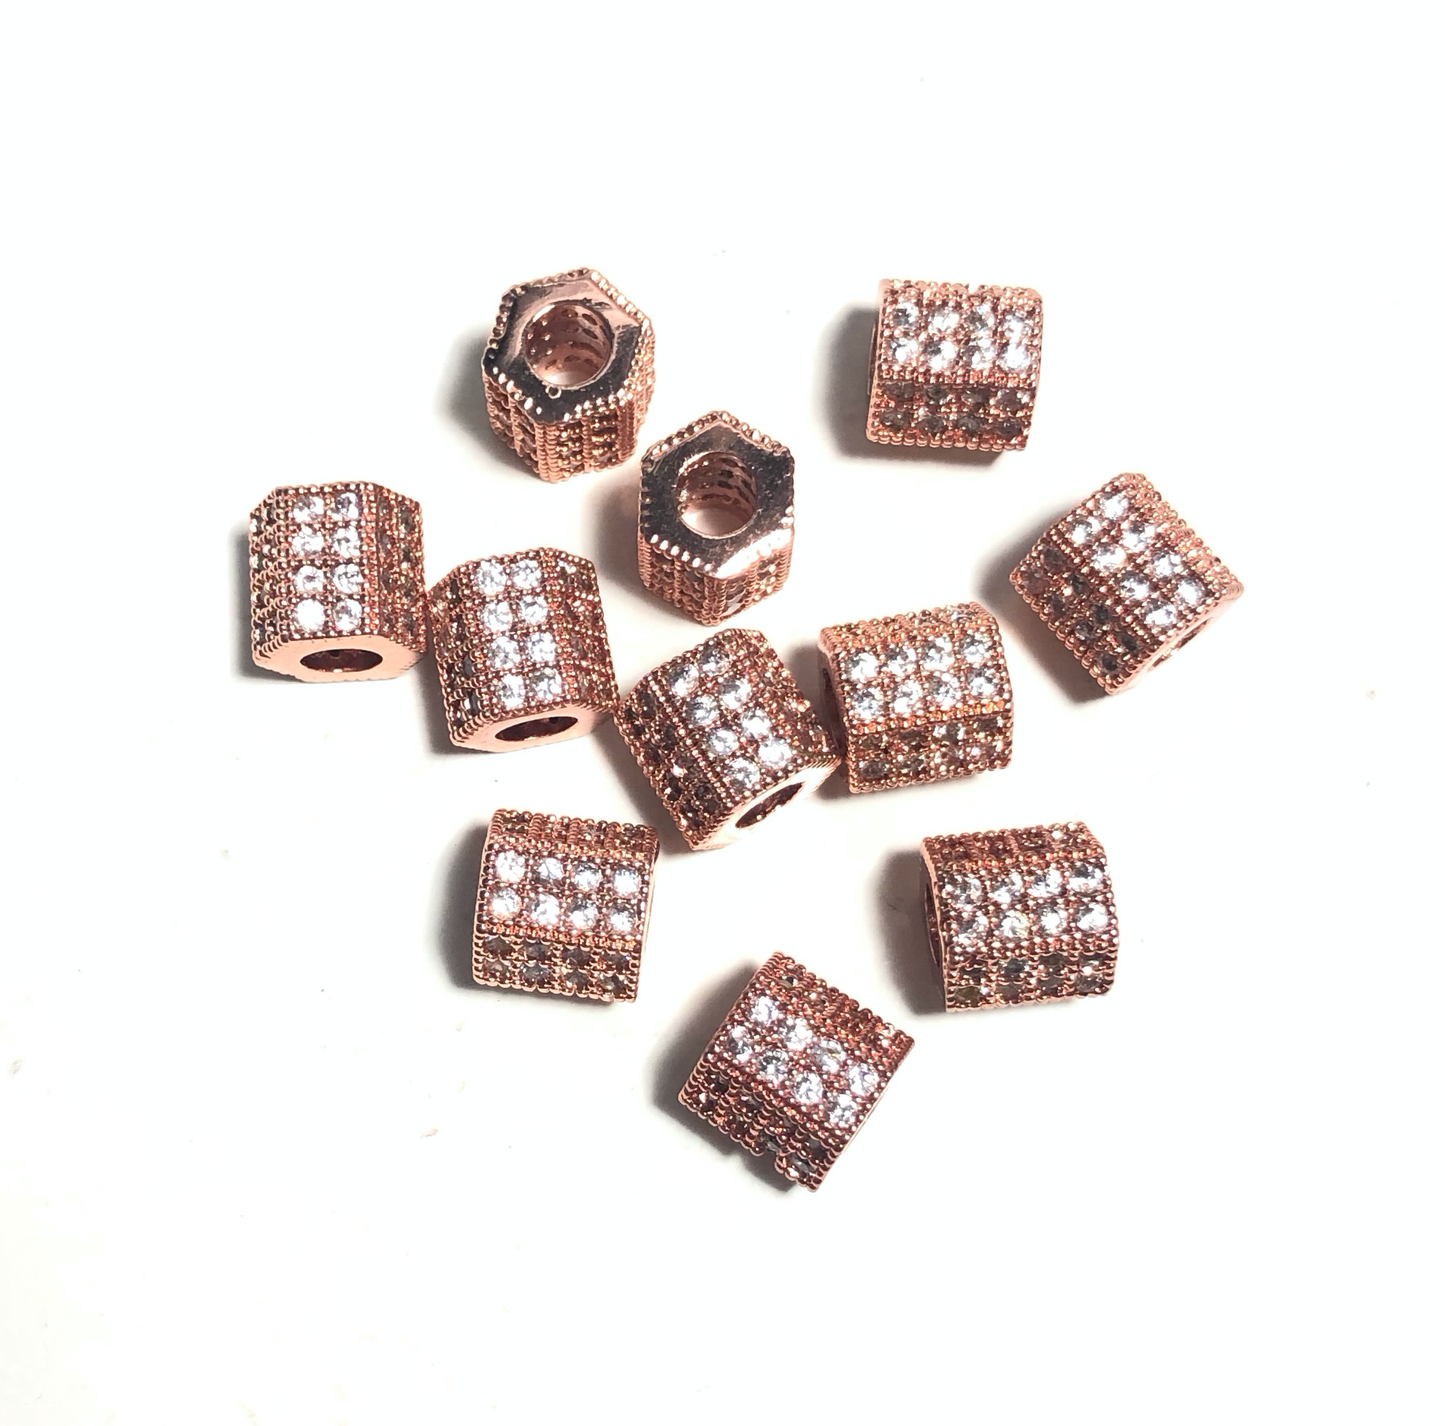 20pcs/lot 8*7mm Clear CZ Paved Hexagon Rondelle Spacers Rose Gold CZ Paved Spacers Rondelle Beads Charms Beads Beyond